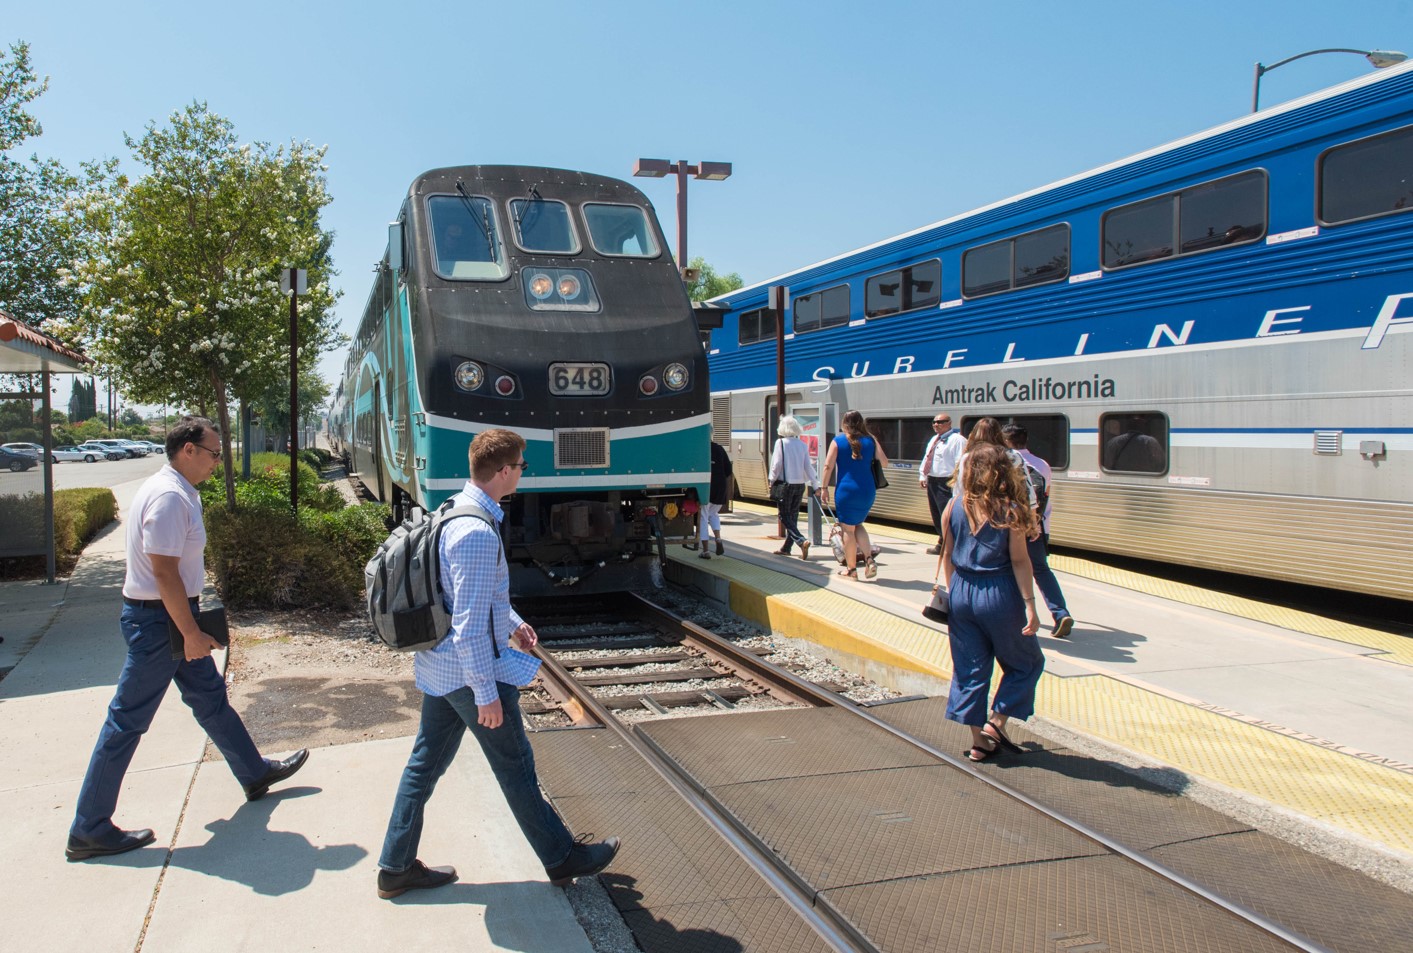 Passengers are passing by a Metrolink train to board an Amtrak train in southern California.